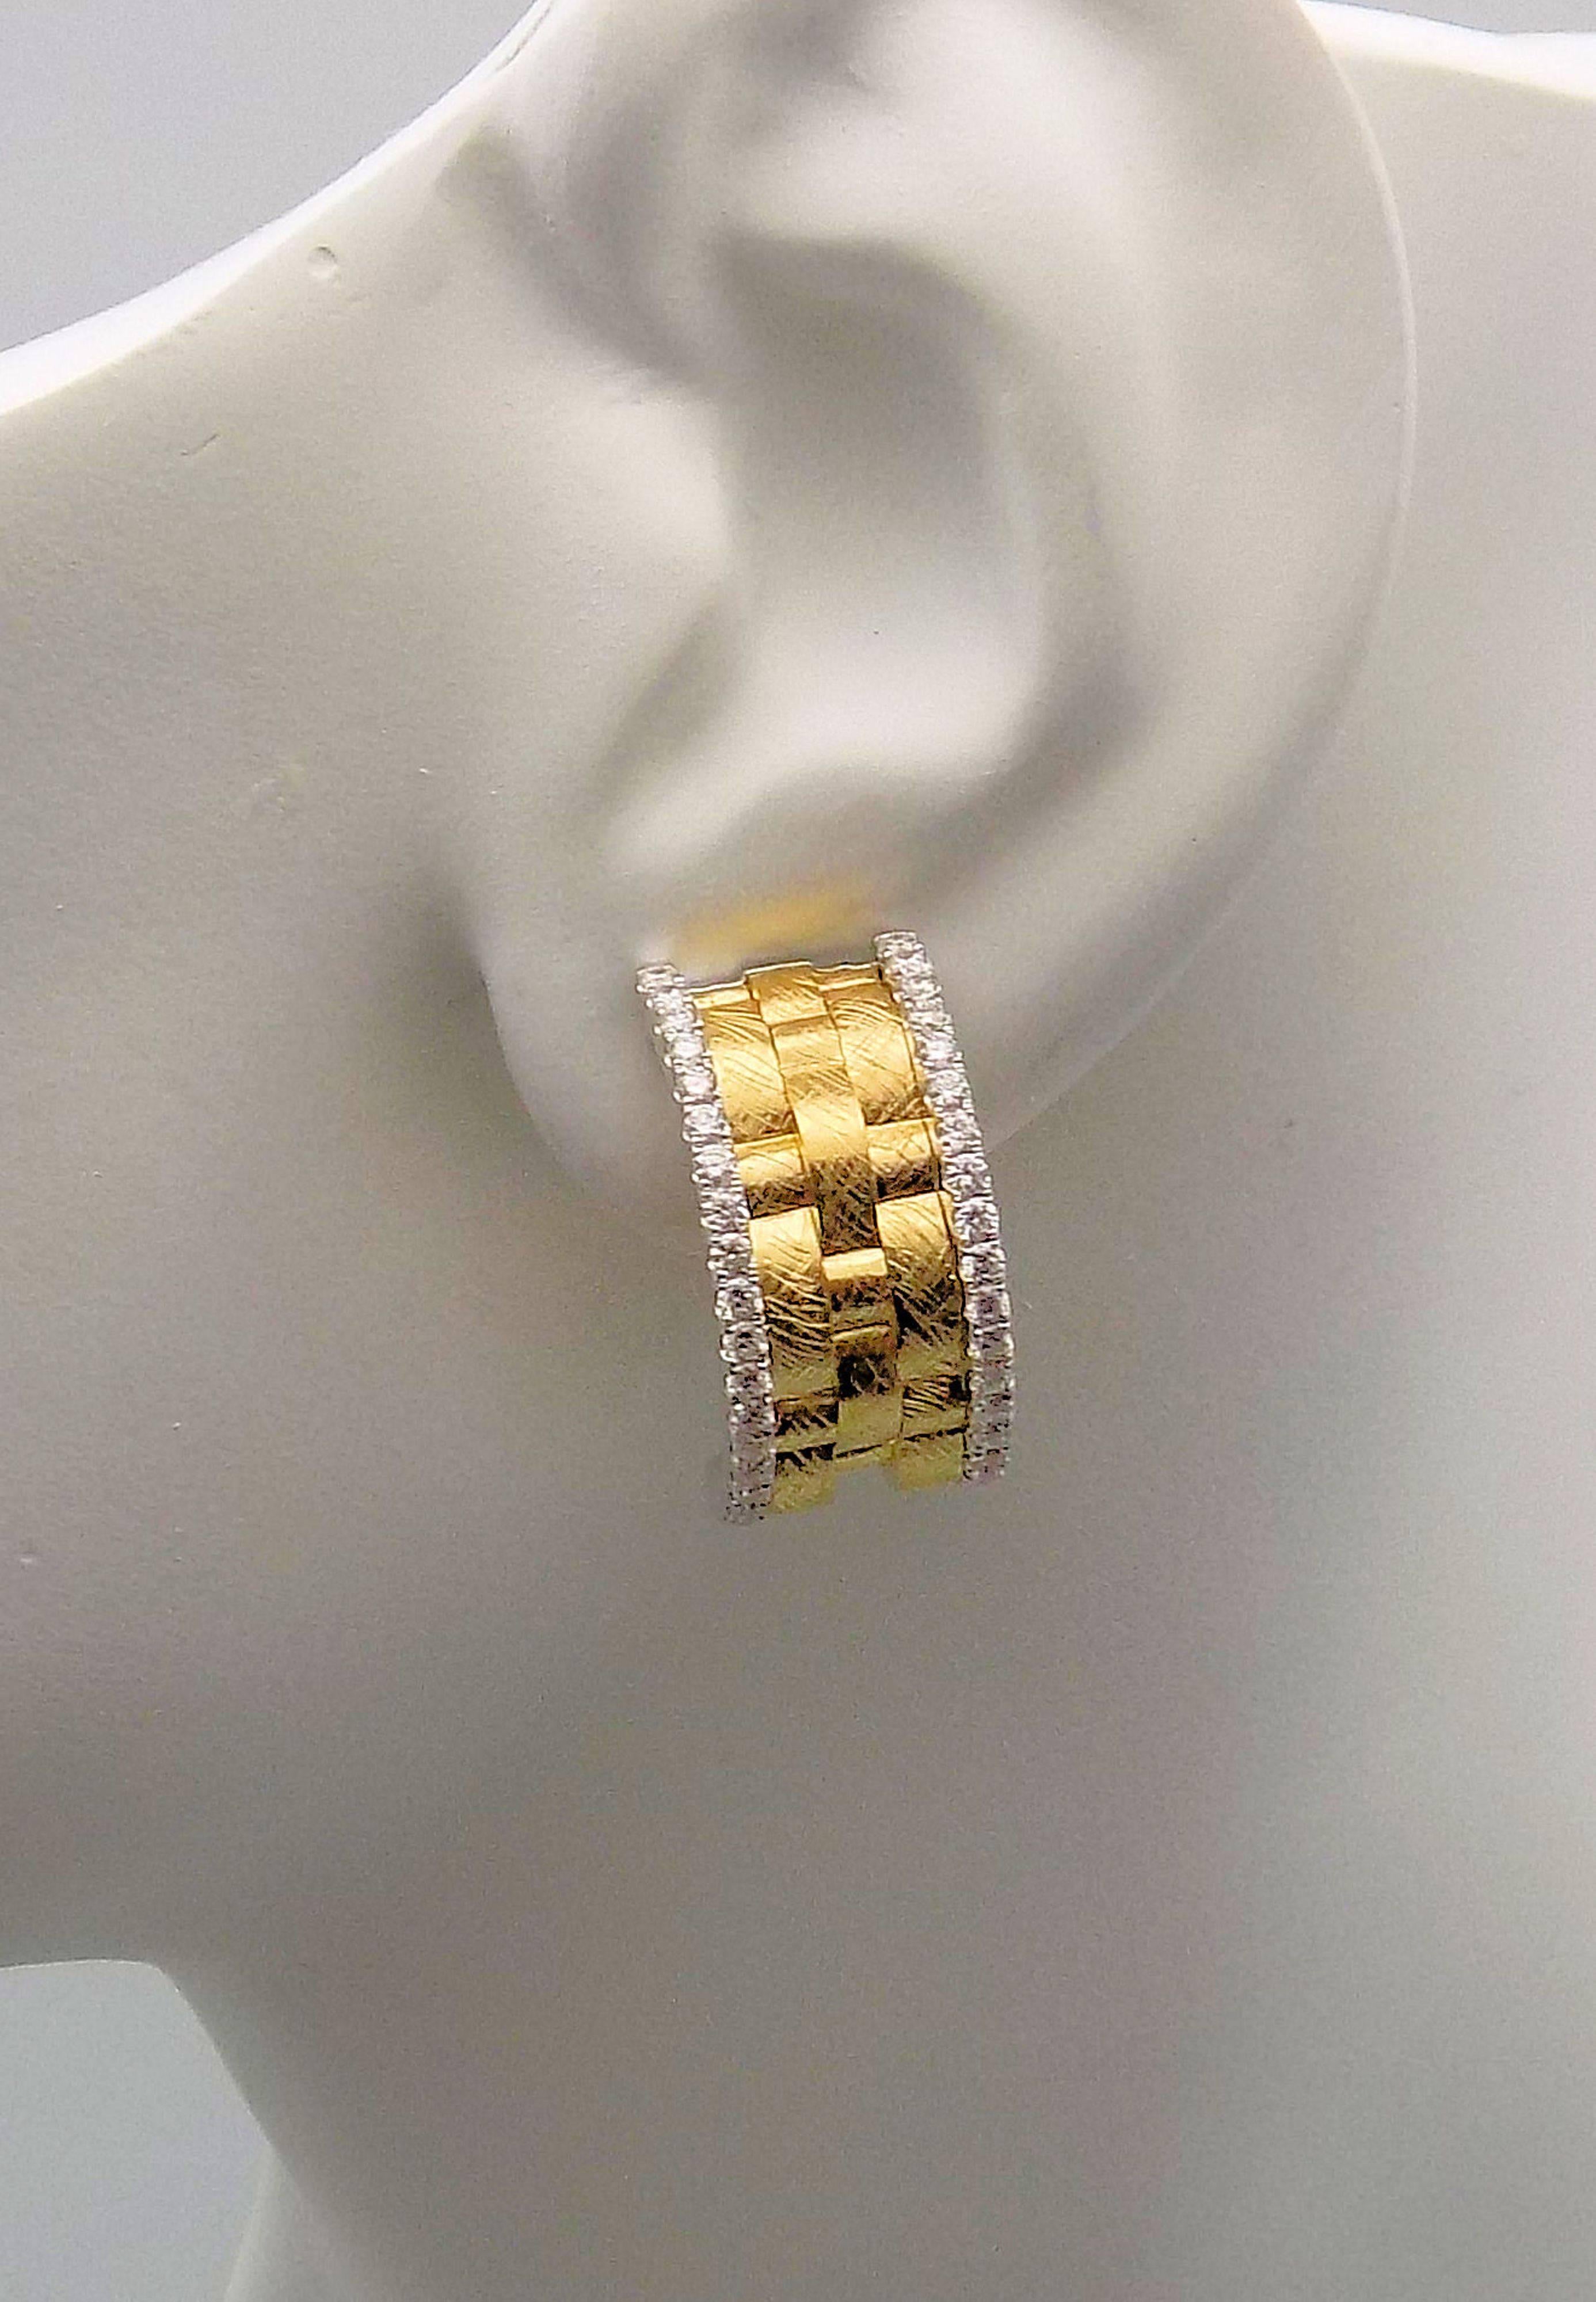 Stunning Pair of 18 Karat White Gold & Yellow Gold Pierced Convertible to Clip Earrings Featuring 80 Round Brilliant Diamonds 1.09 Carat Total Weight; SI, H; Signed: BESSA 9.2 DWT or 14.31 Grams.